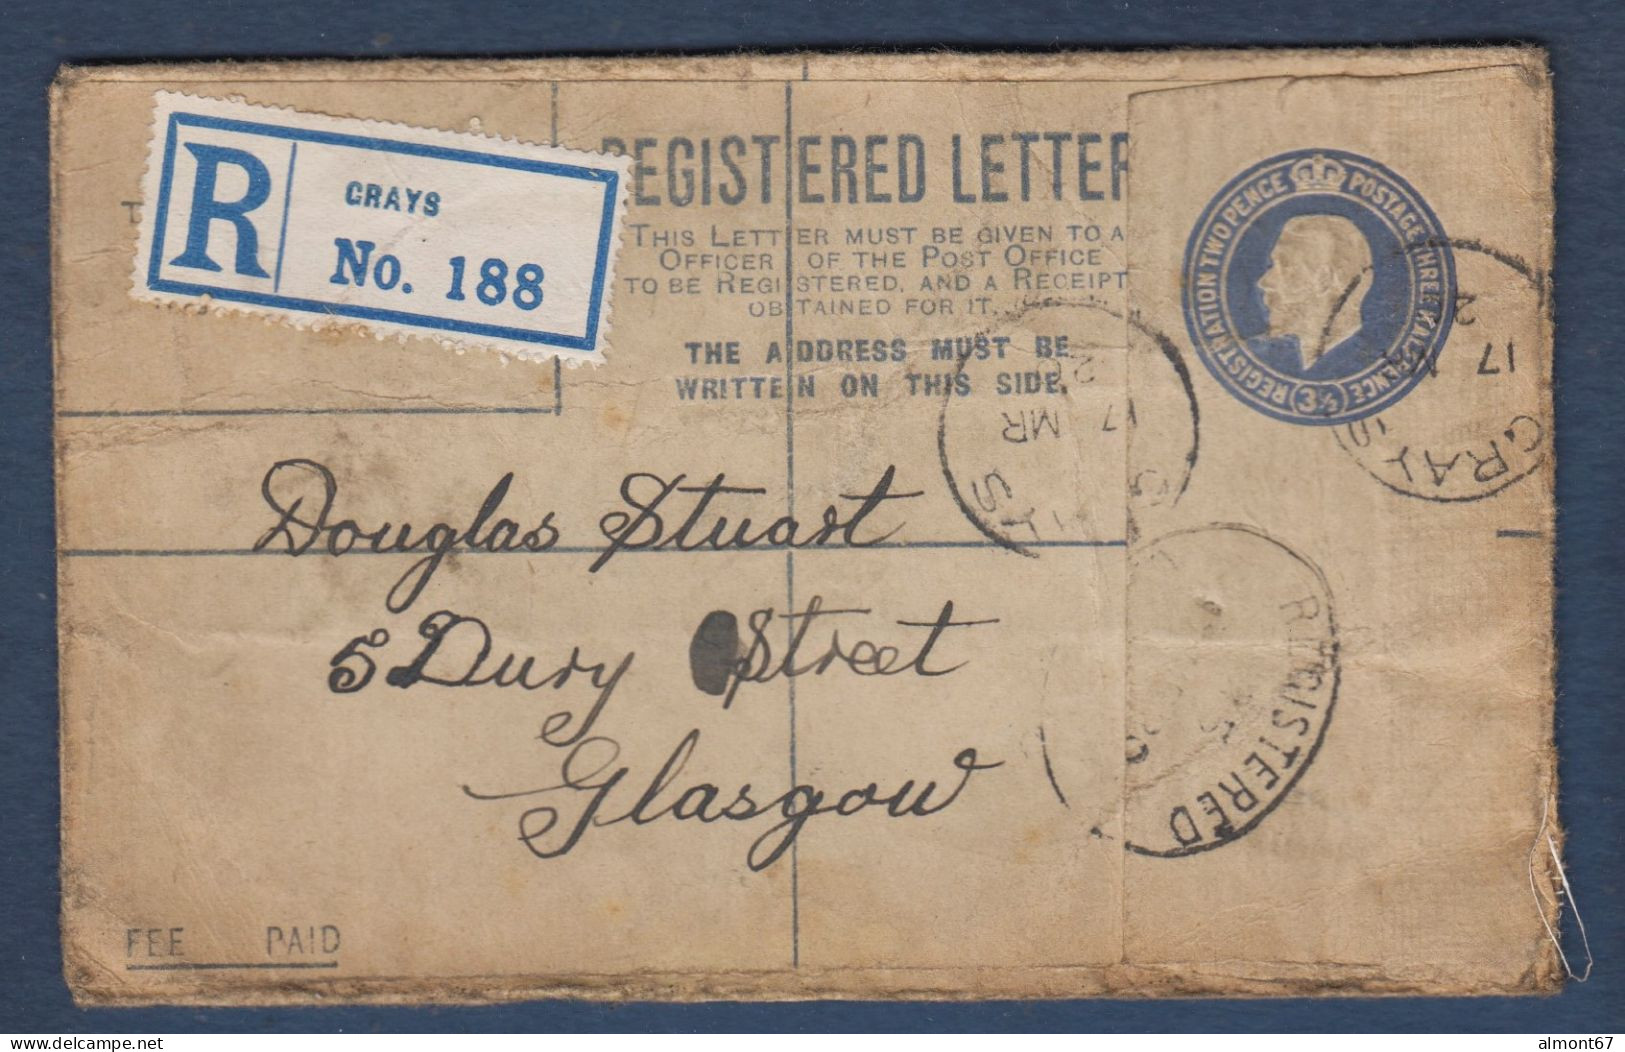 GRAYS - Registered Letter - Covers & Documents